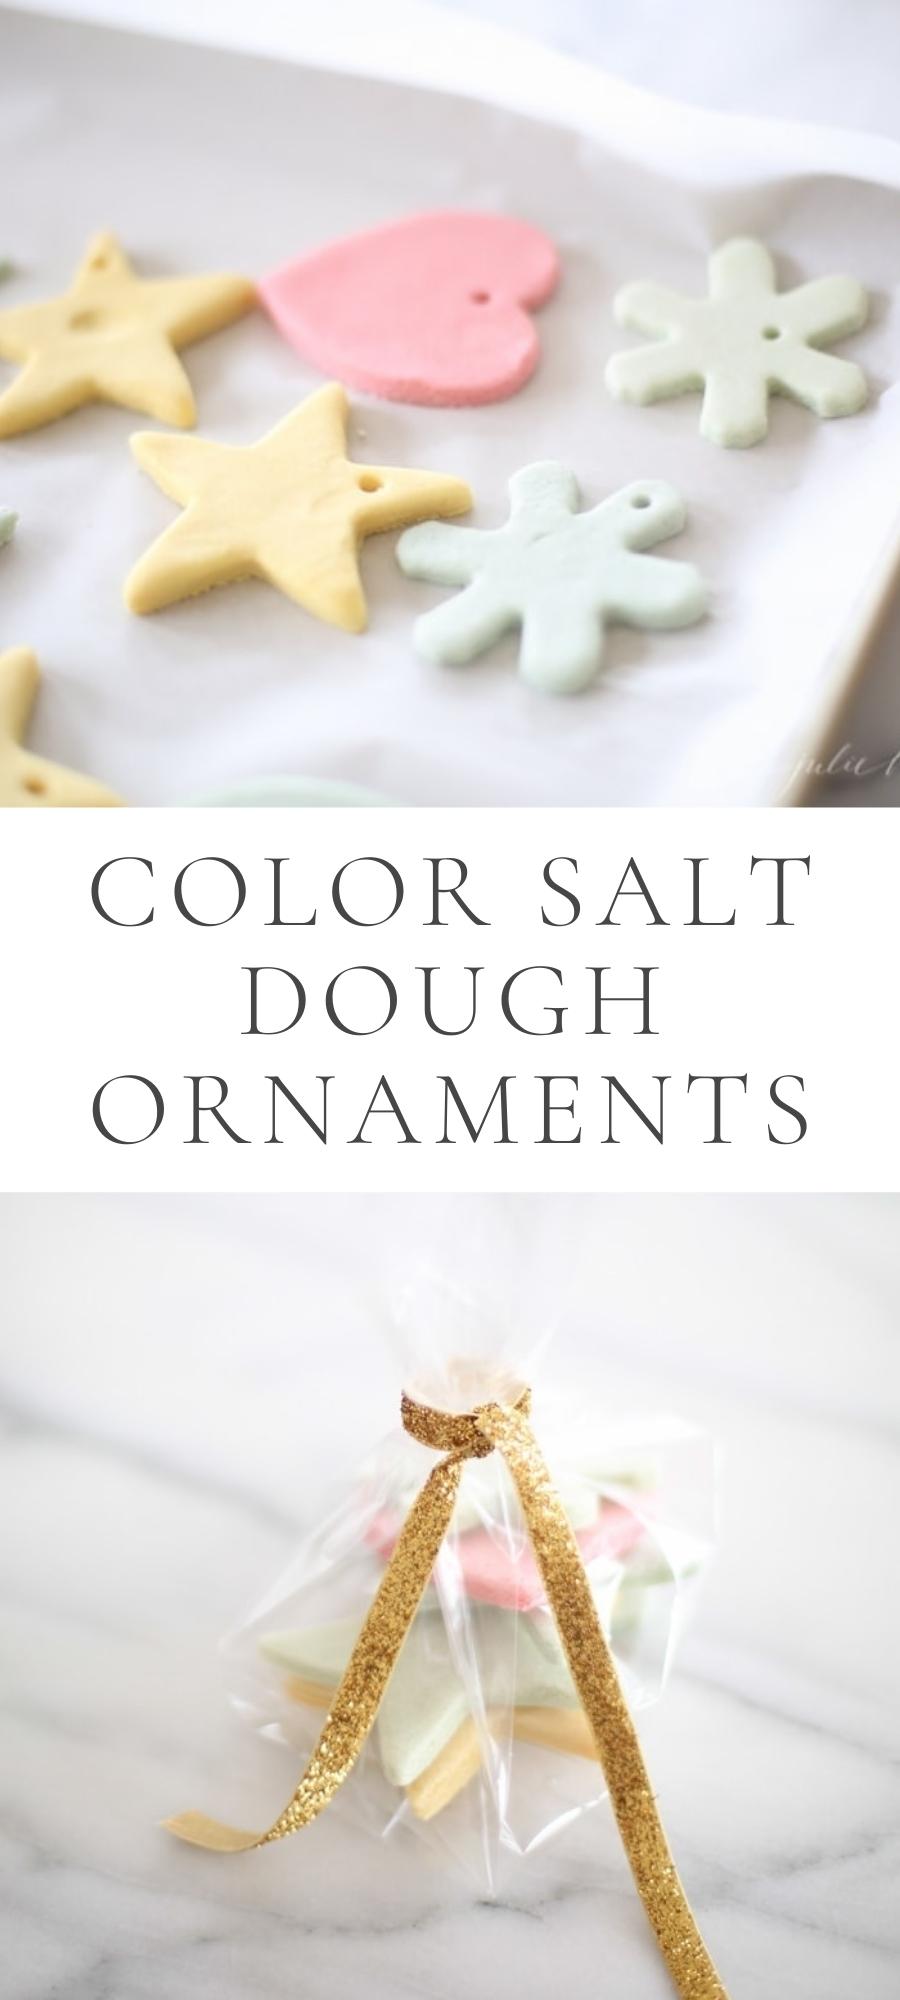 Color Salt Dough Recipe on table and in clear bag with gold ribbon